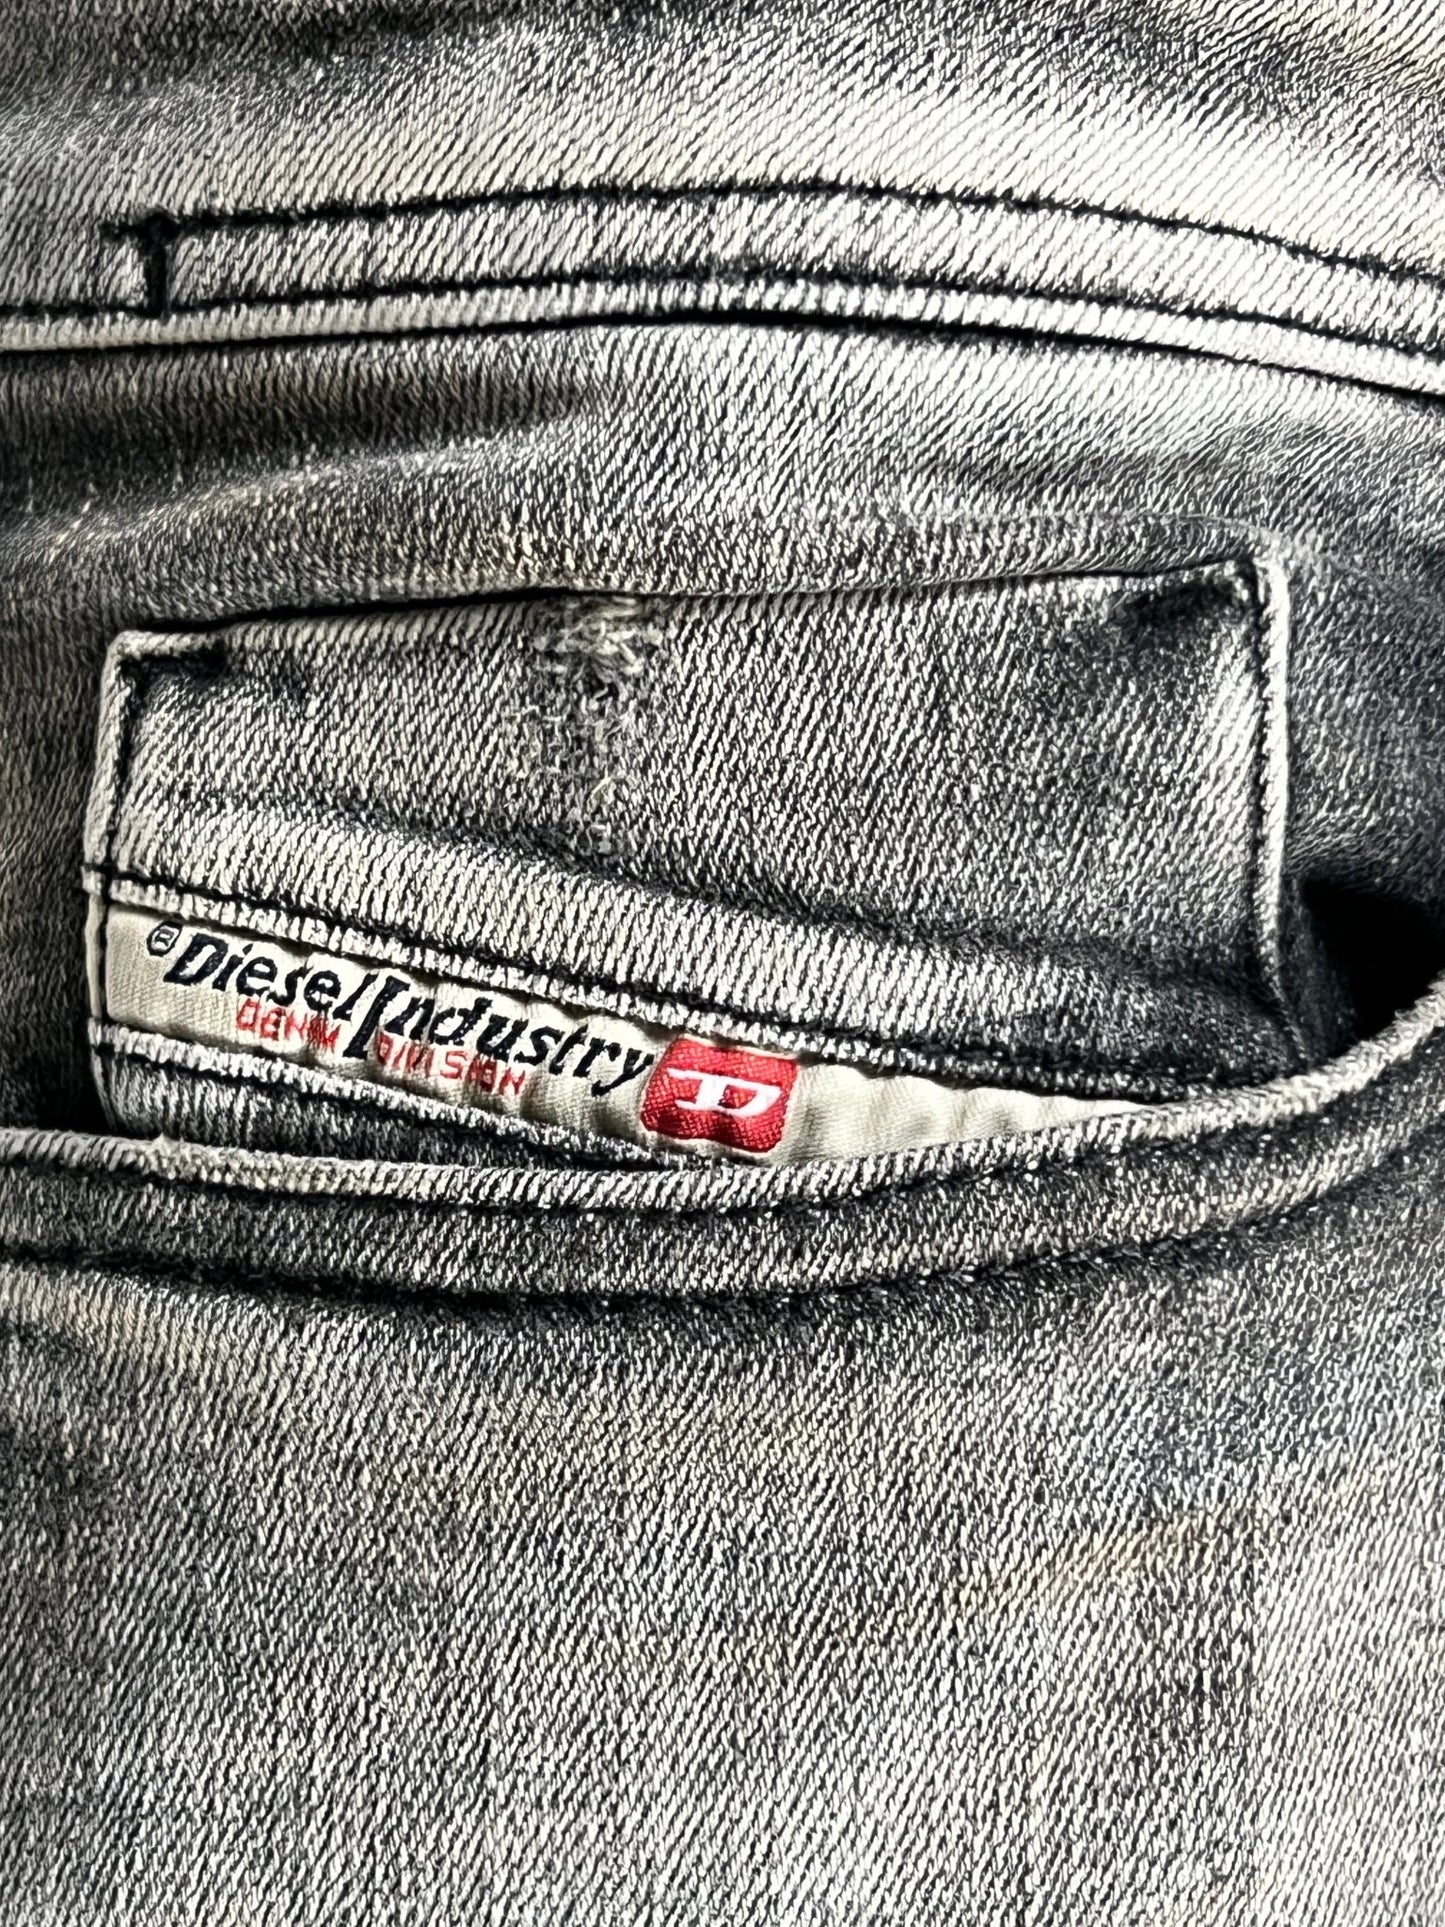 Close-up of a gray stretch denim garment label with the text "DIESEL 1979 SLEENKER 9H74" displayed inside a waistband.